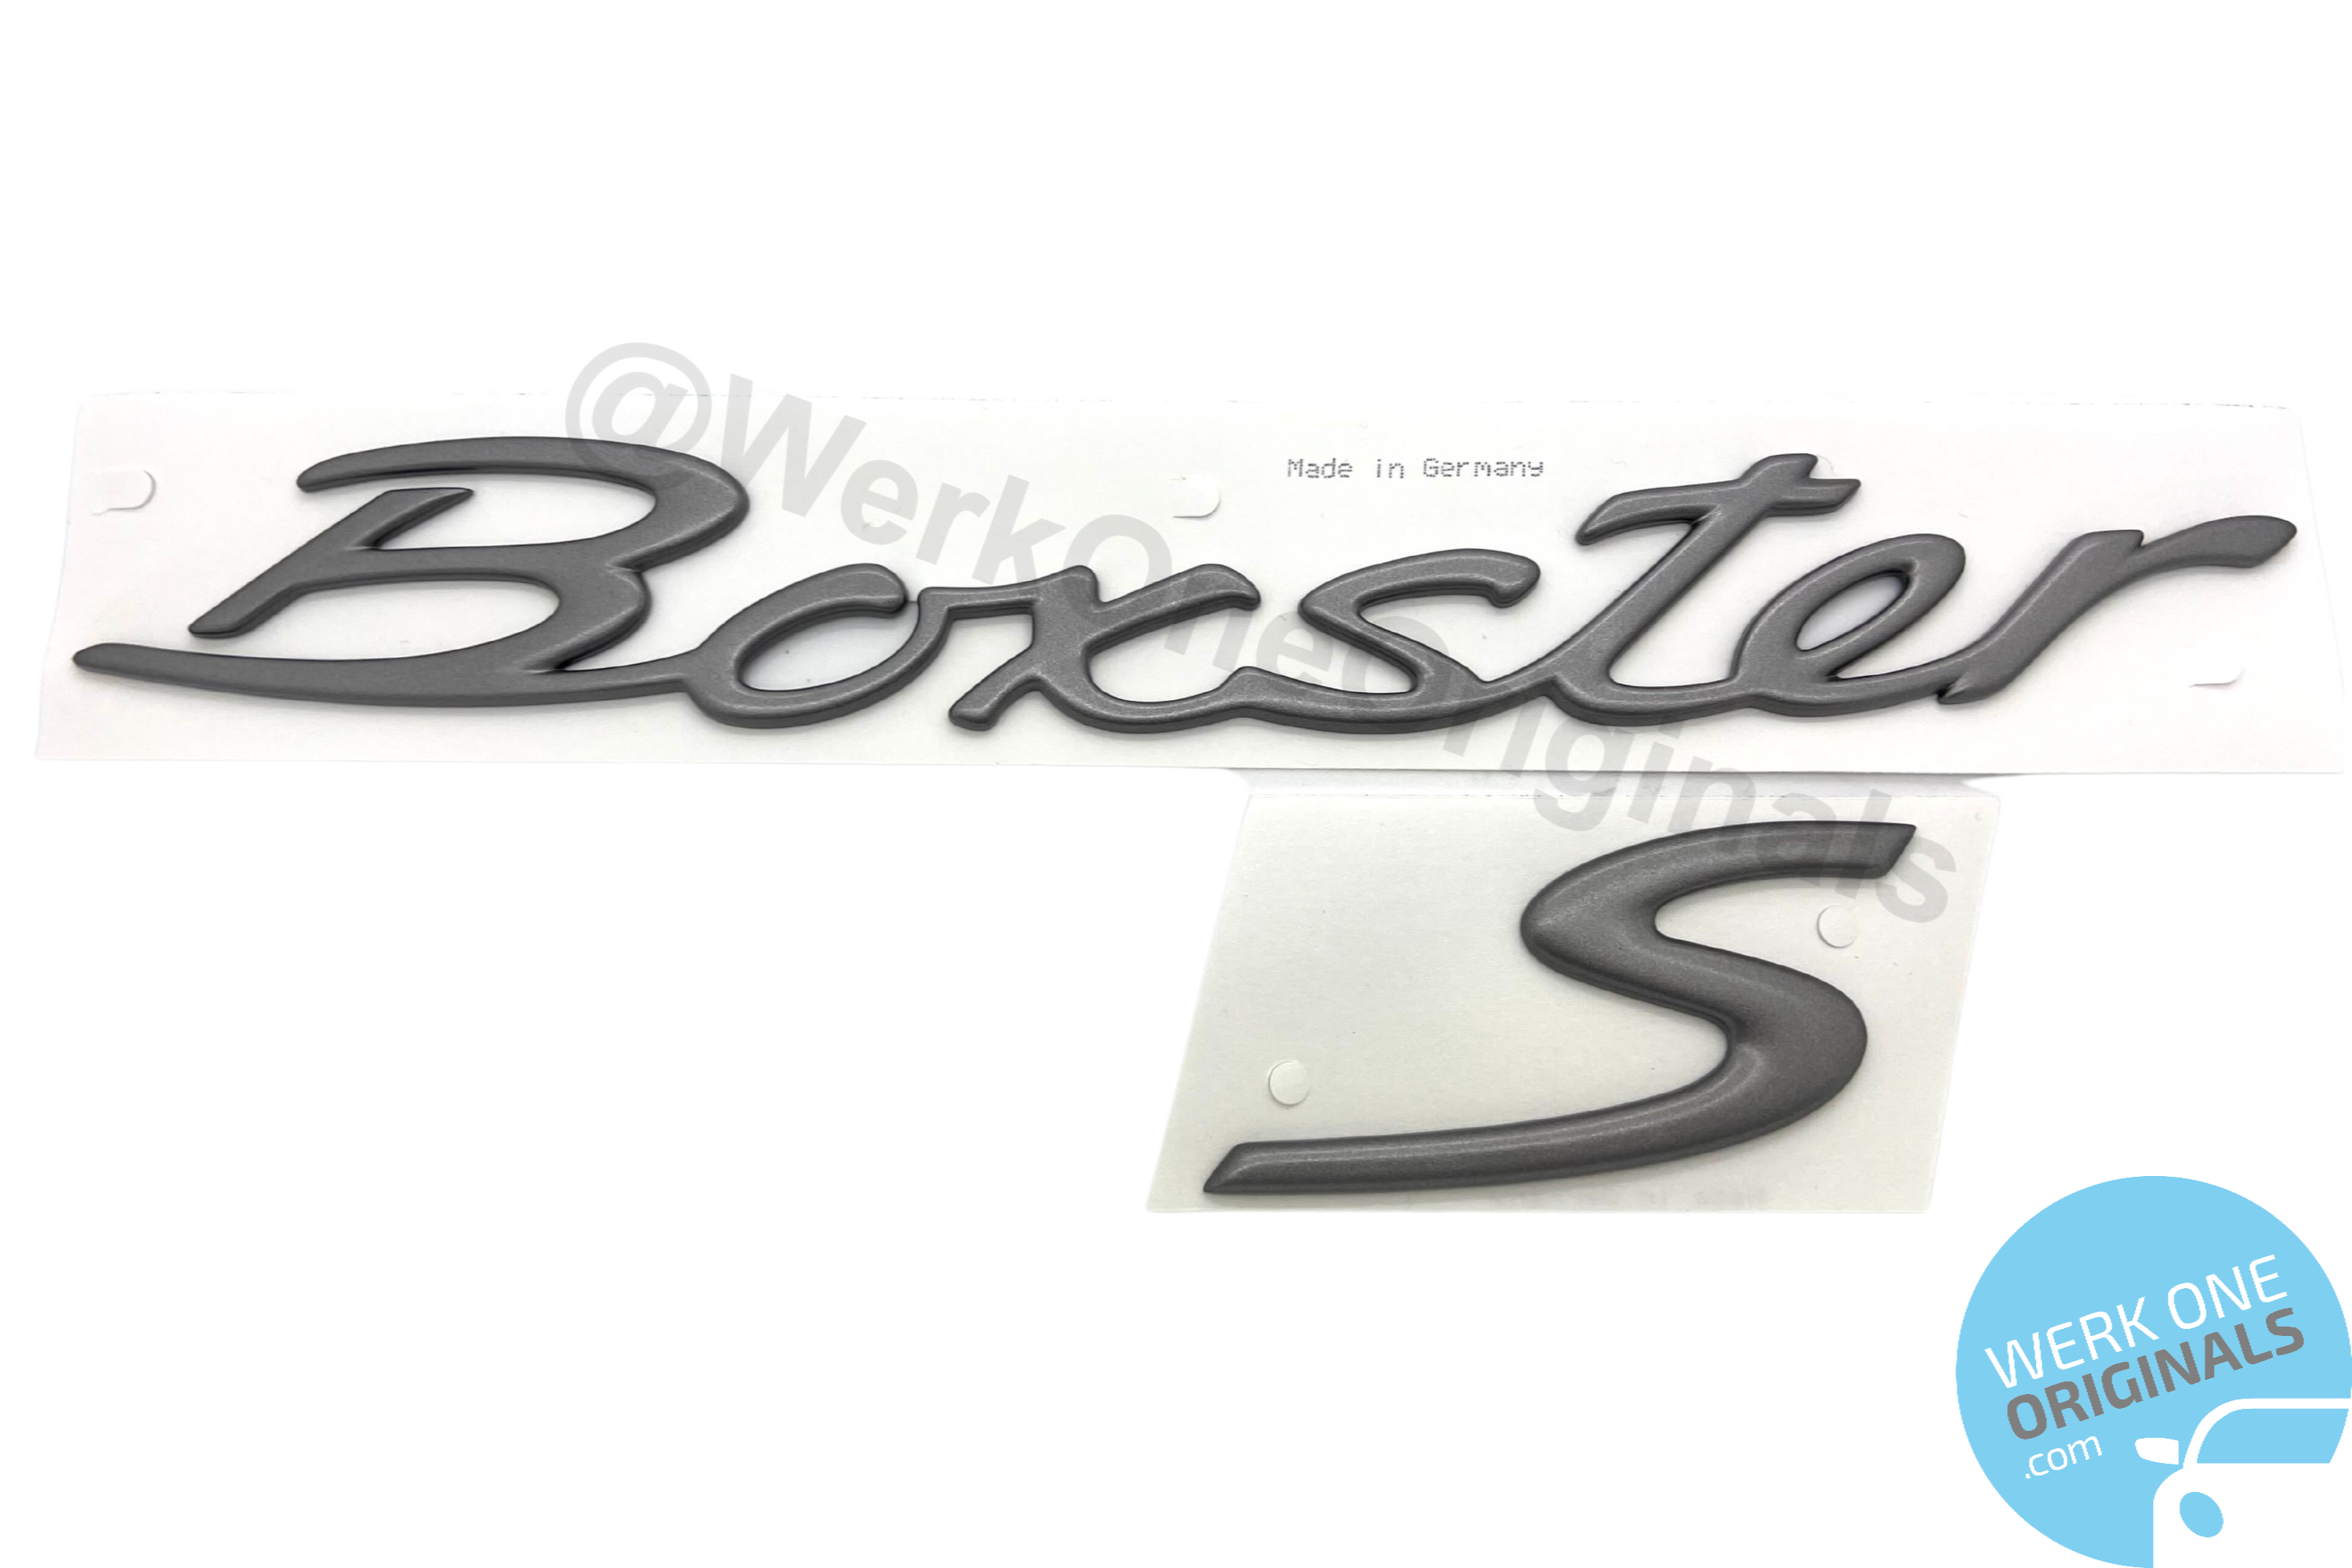 Official Porsche 'Boxster S' Rear Badge in Titanium Grey for Boxster S Type 986 Models